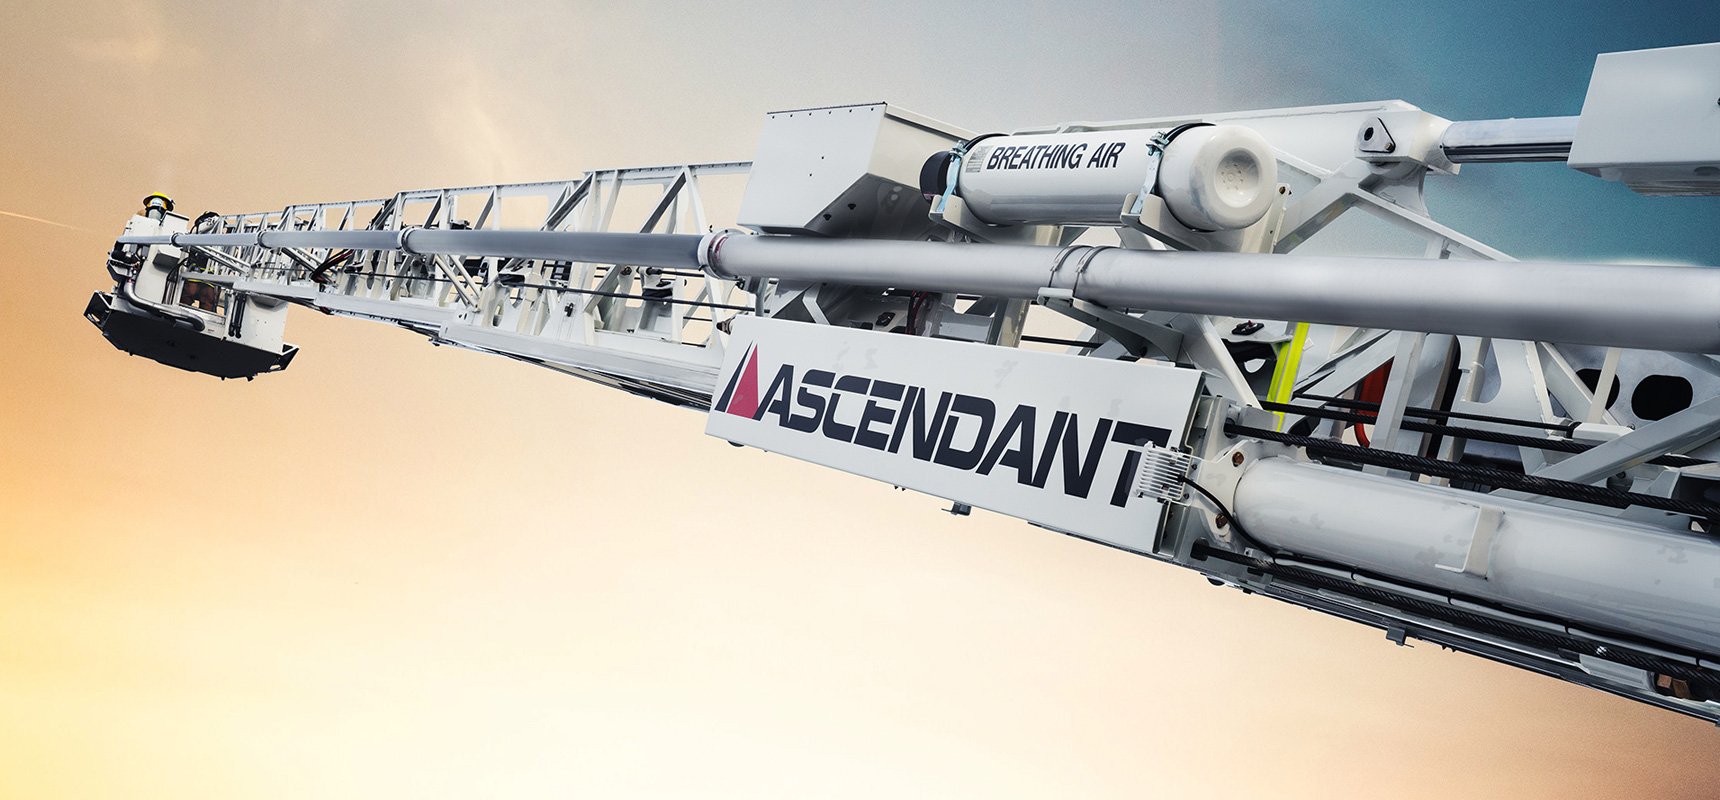 An ascendant aerial device is fully-extended in the air, showing the heavy-duty 100K psi high-strength steel design.